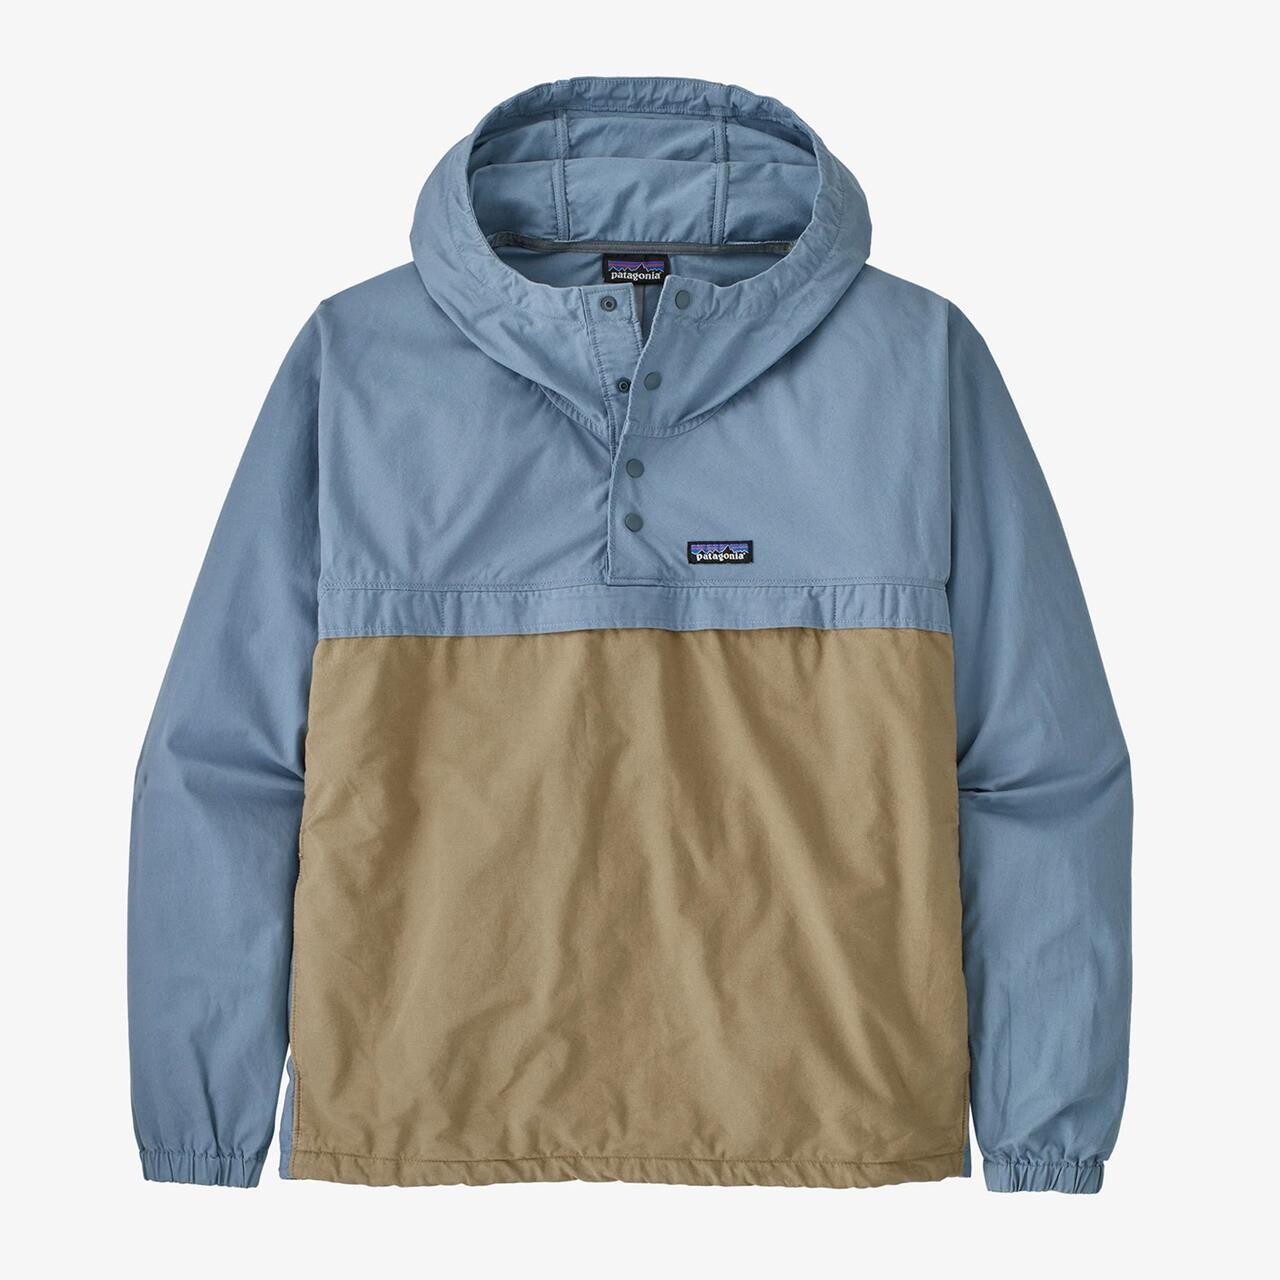 10: Patagonia Funhoggers Anorak (Beige (UNDYED NATURAL) Large)